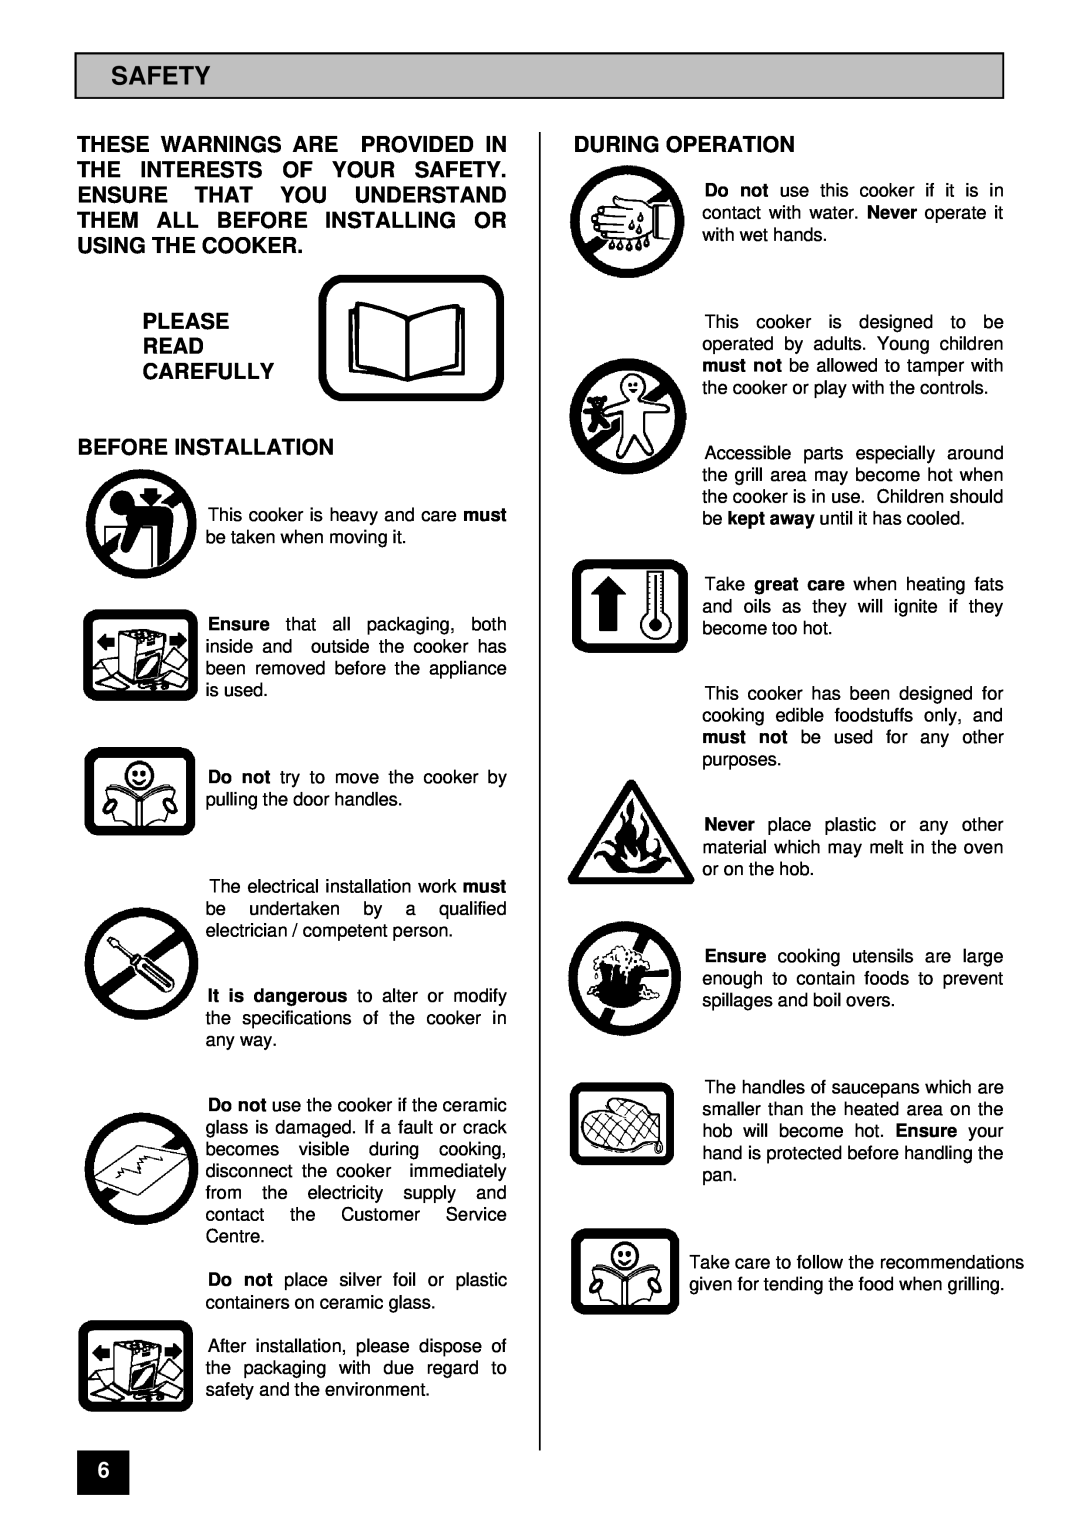 Zanussi ZCE ID manual Safety, Please Read Carefully Before Installation, During Operation 